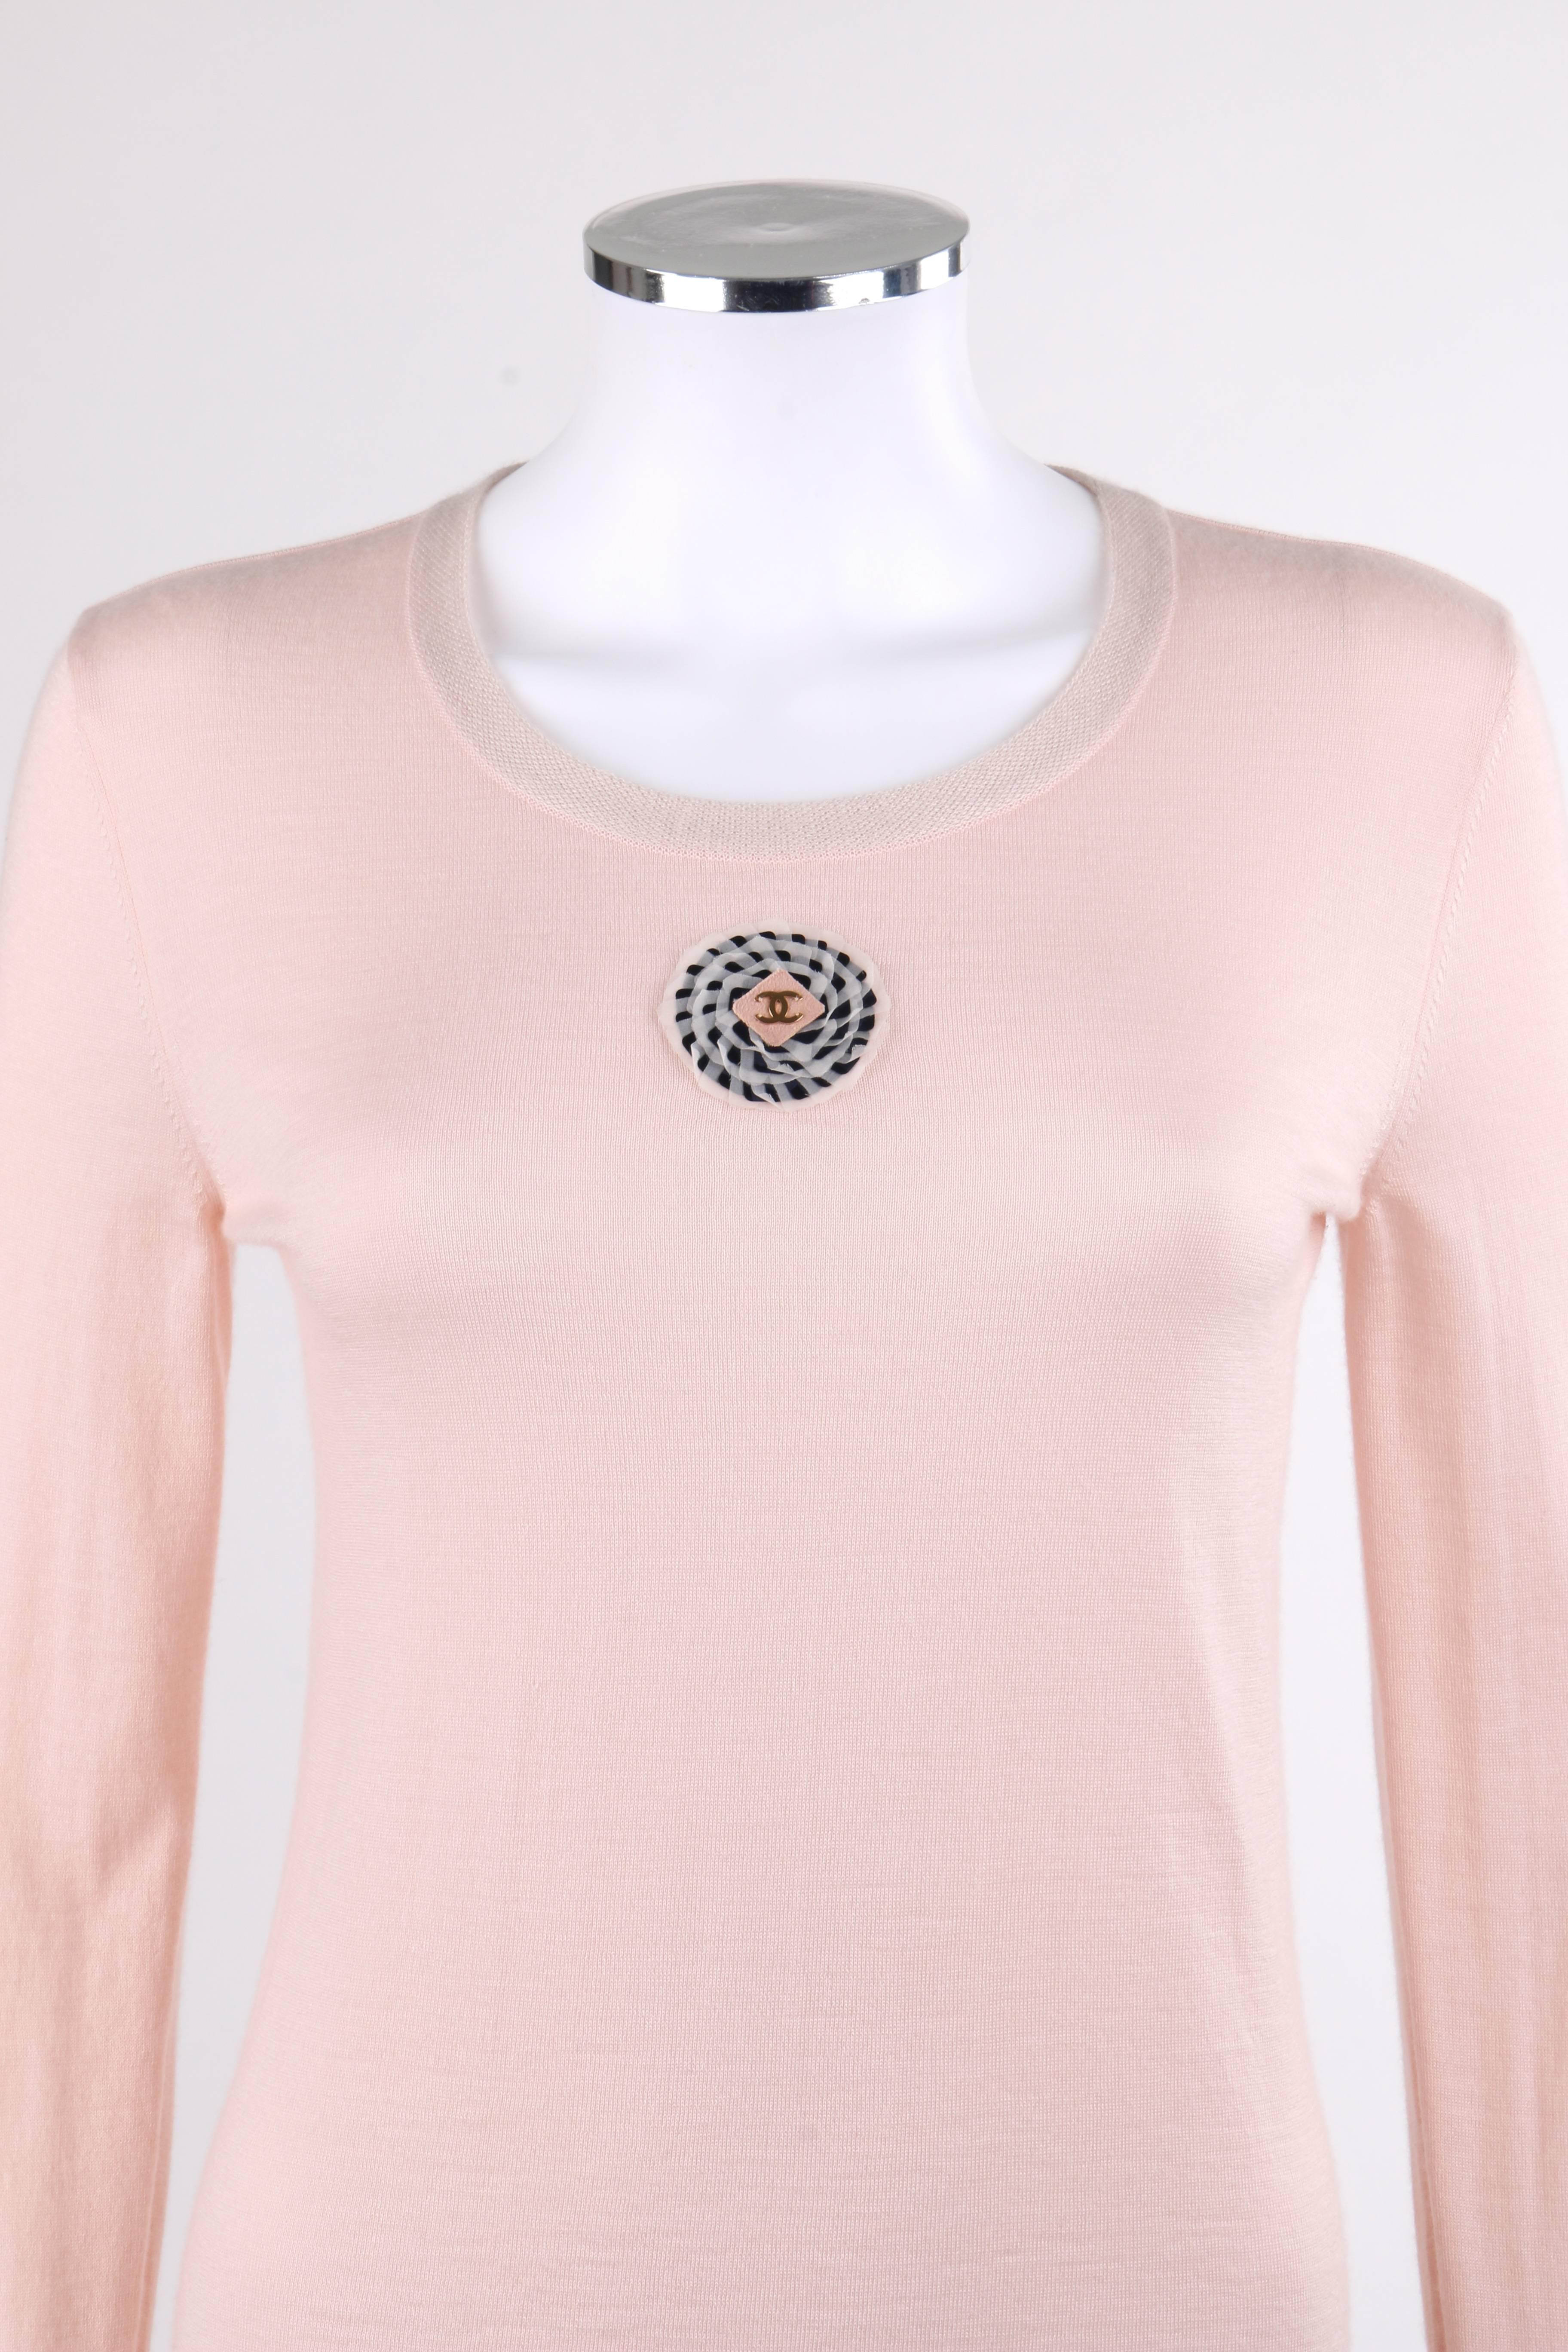 Chanel Resort 2011 Light pink cashmere and silk blend knitwear top. Center front black and white Camellia flower applique with centered gold-tone "CC" embellishment, Scoop neckline. Long sleeves. Pull over style. Marked Fabric Content: